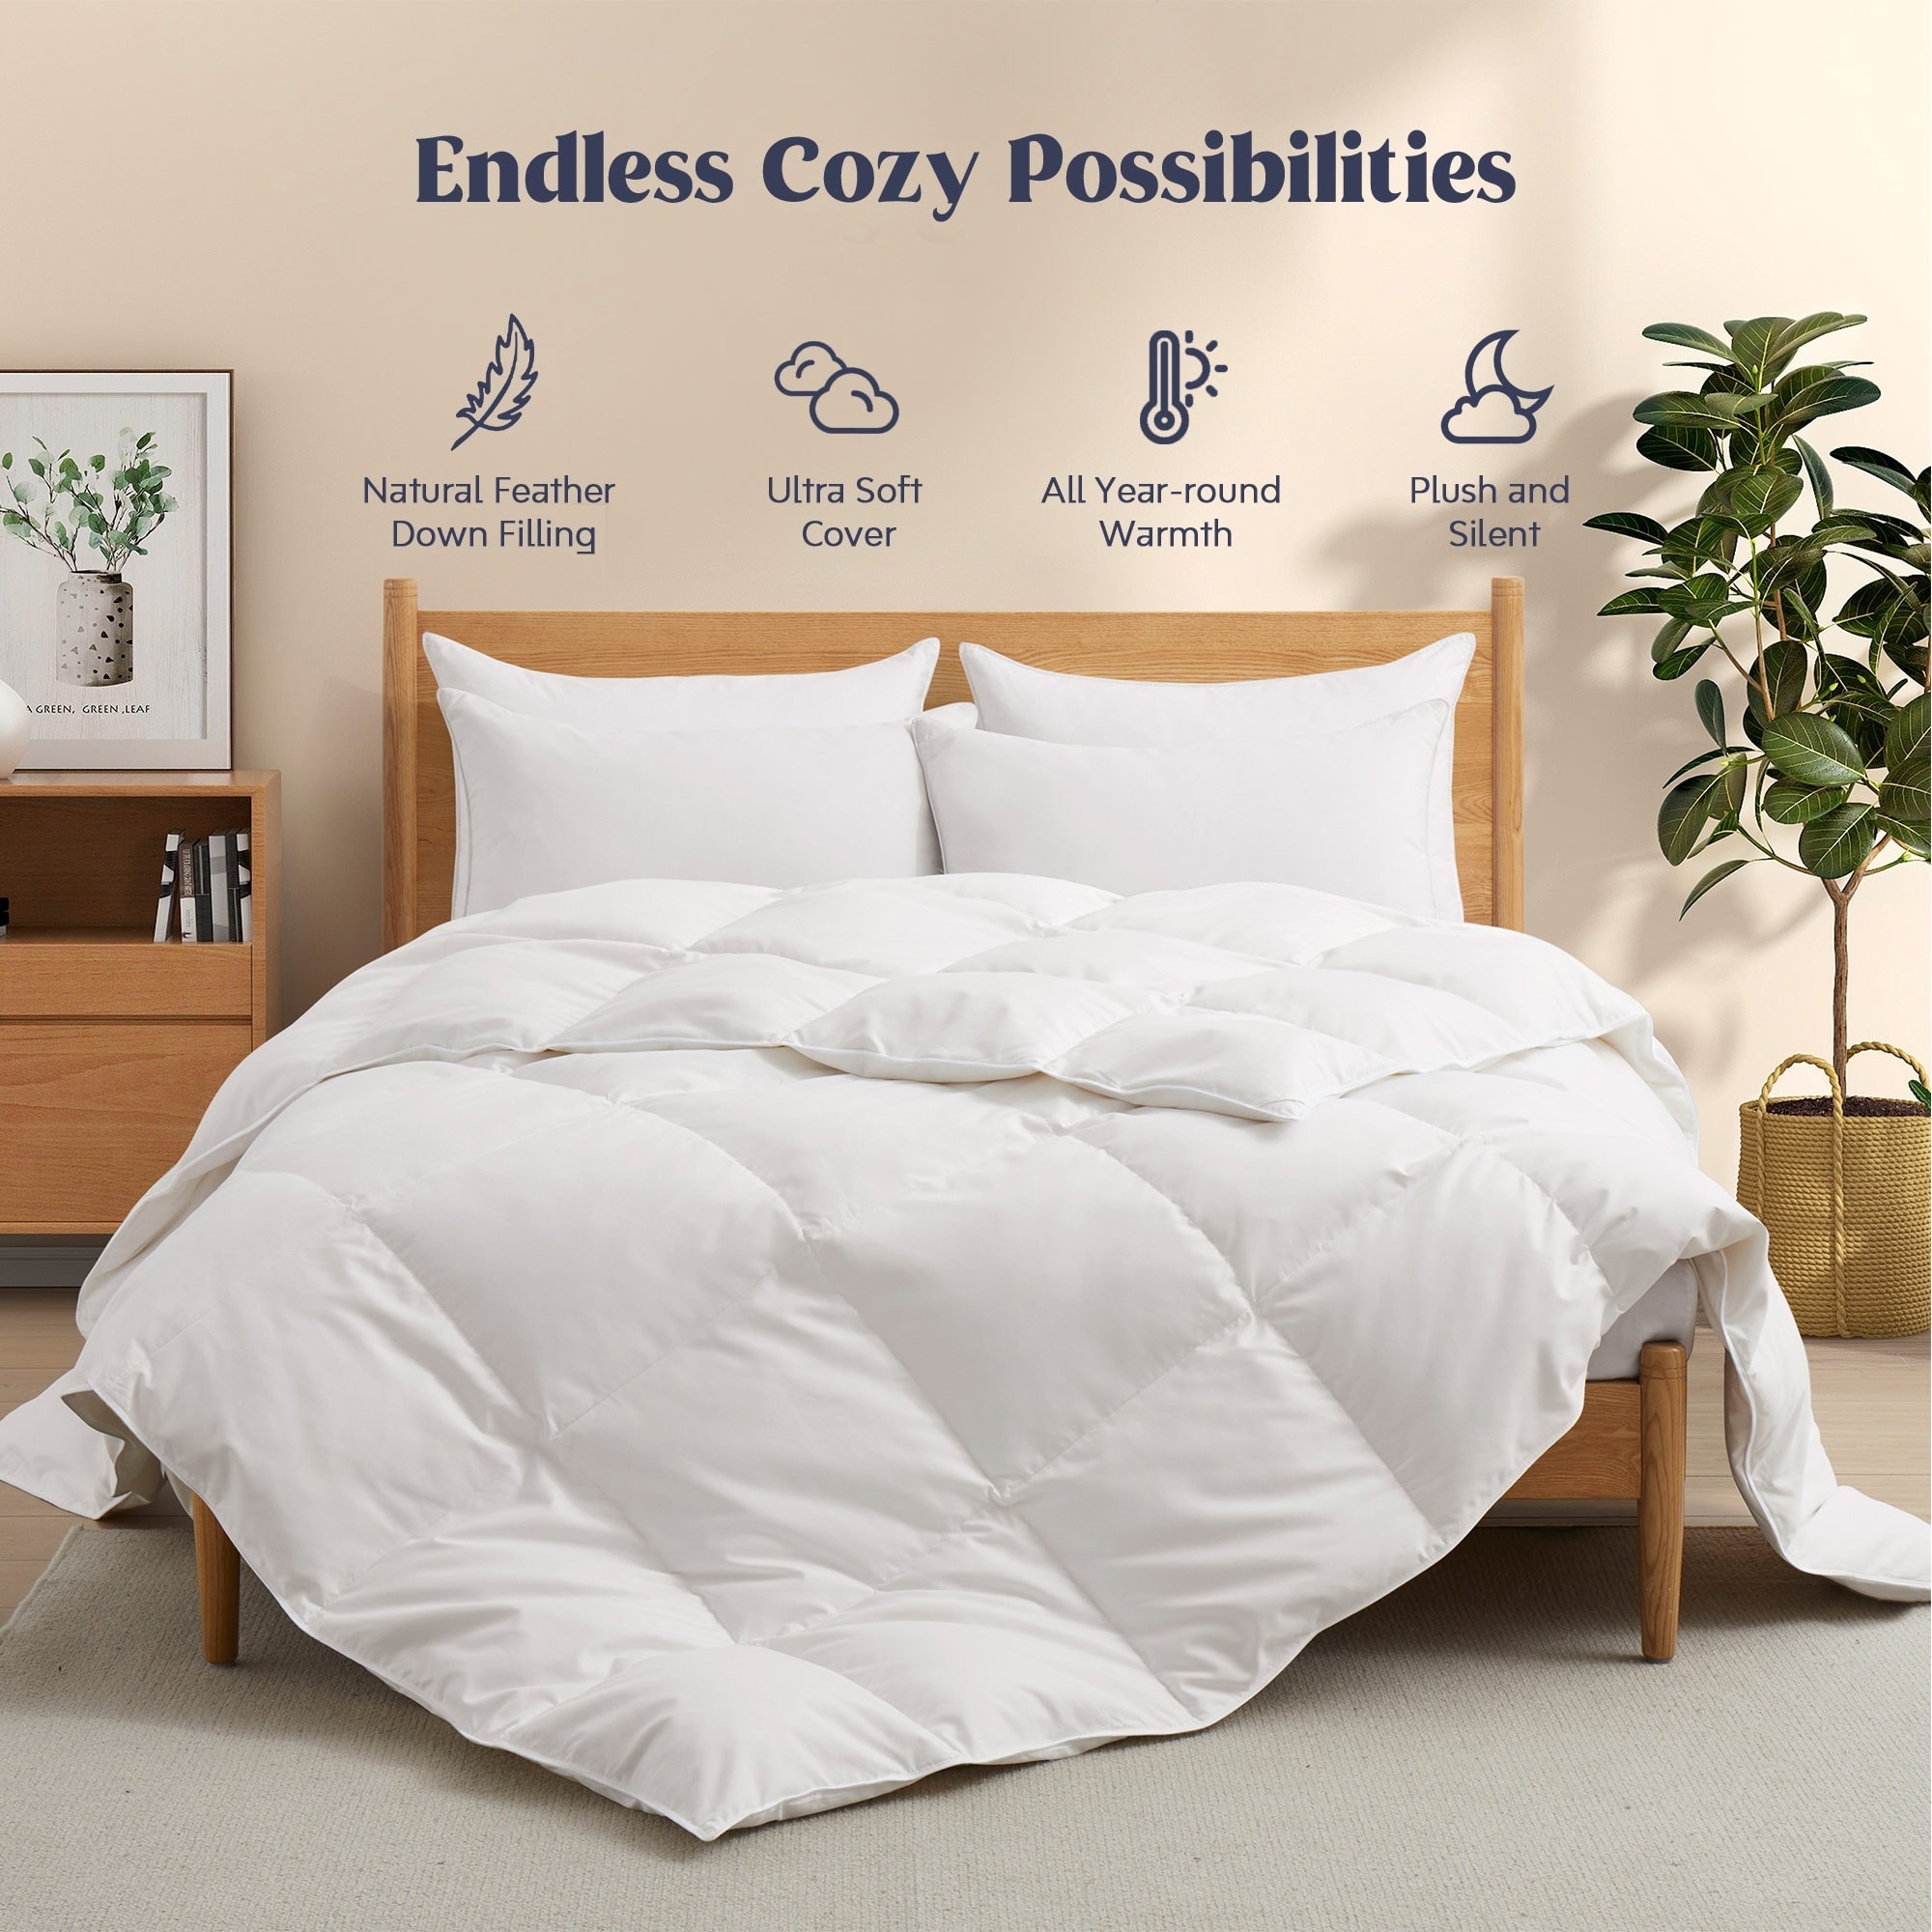 https://ak1.ostkcdn.com/images/products/is/images/direct/5bf967706e3c6b6e29e51f9dcd85ae91a7546f2a/White-Feather-Down-Comforter-Duvet-Insert-All-Warmth-Levels.jpg